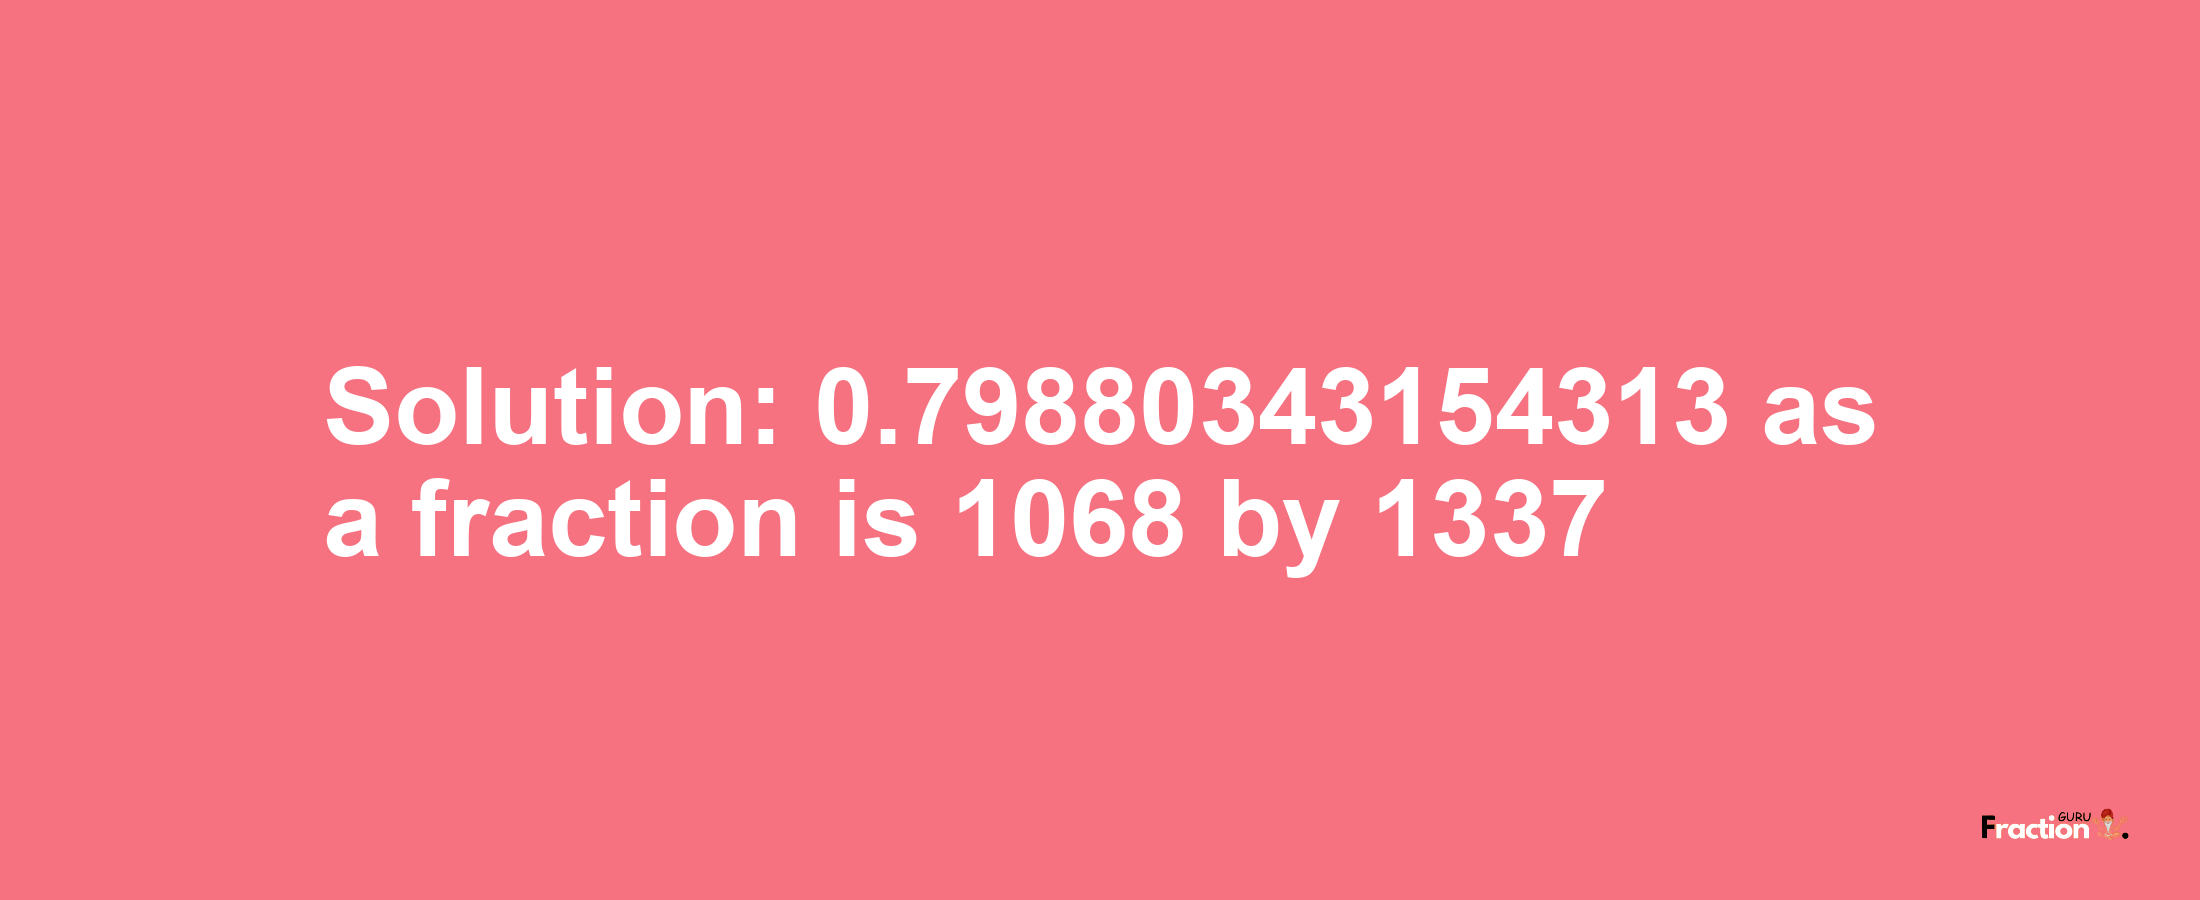 Solution:0.79880343154313 as a fraction is 1068/1337